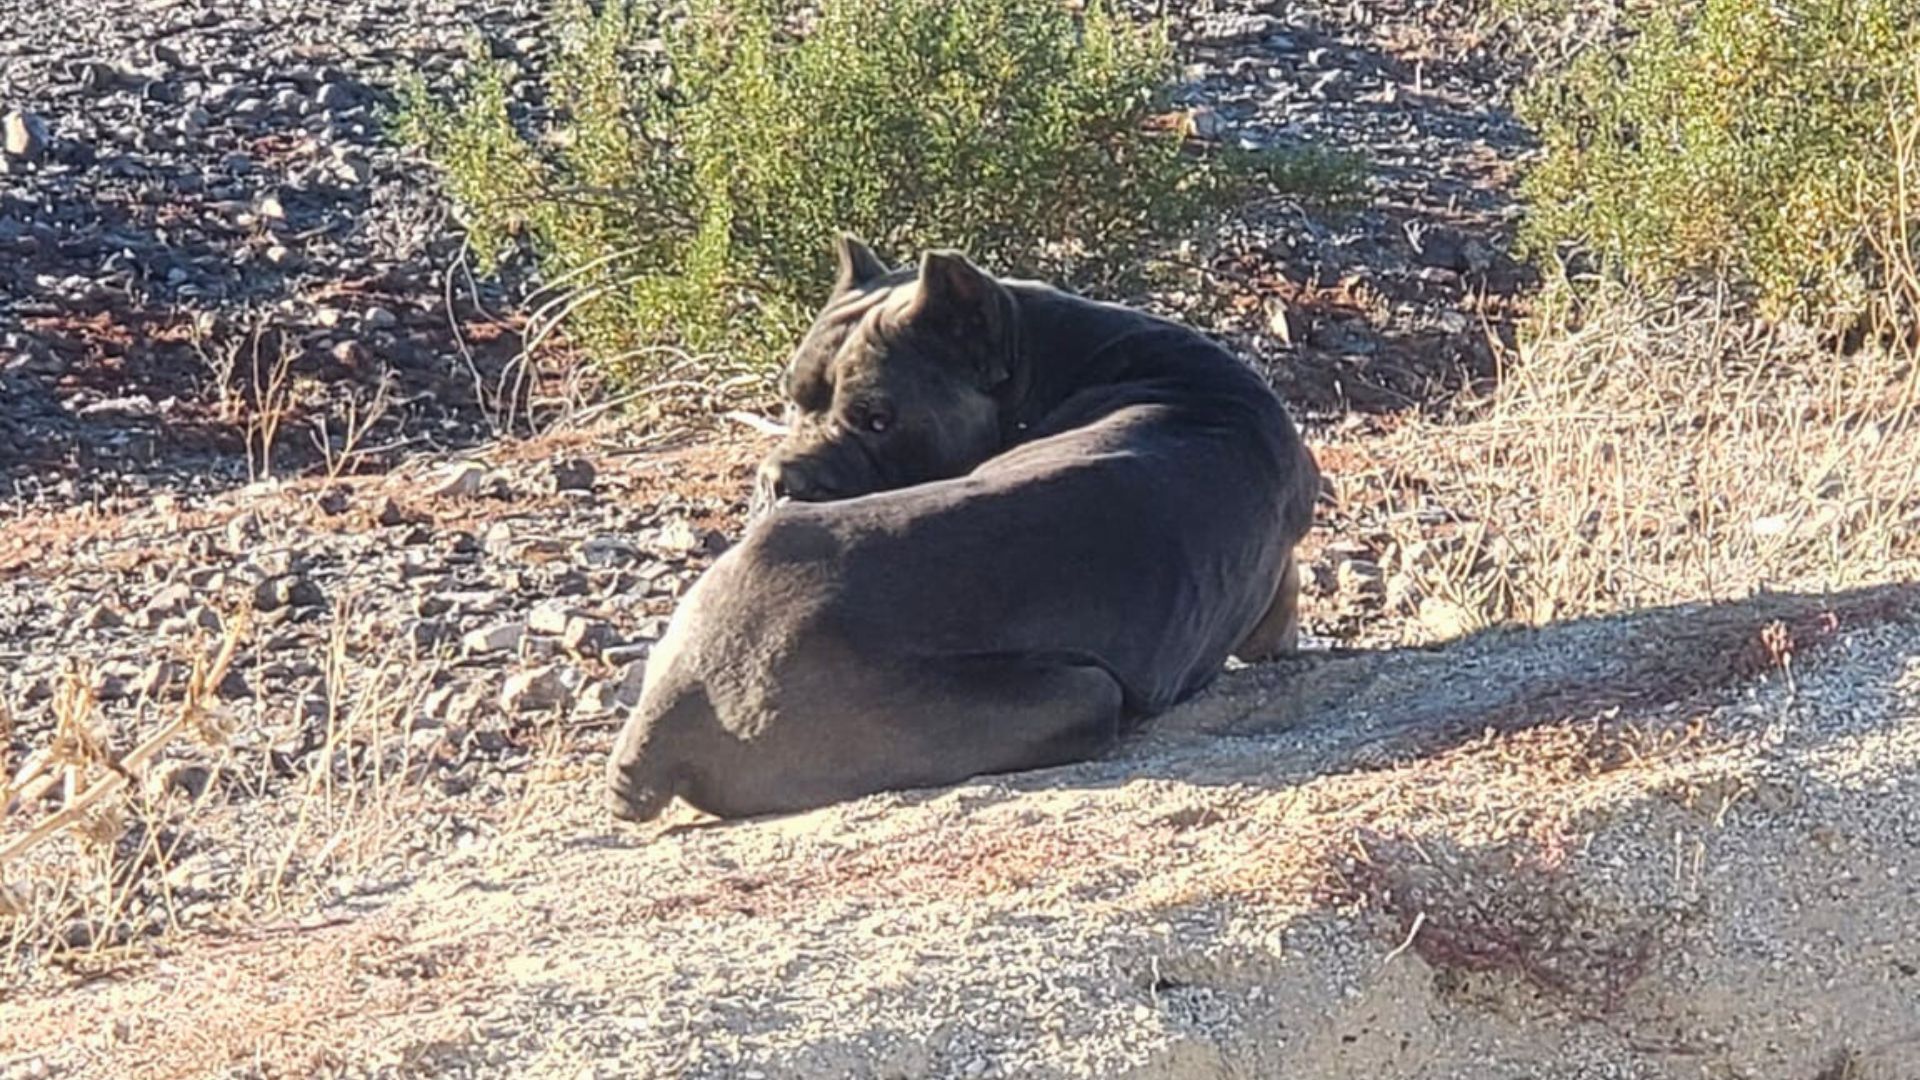 Owner Cruelly Abandons Cane Corso Deep In The Desert With No Food And Water